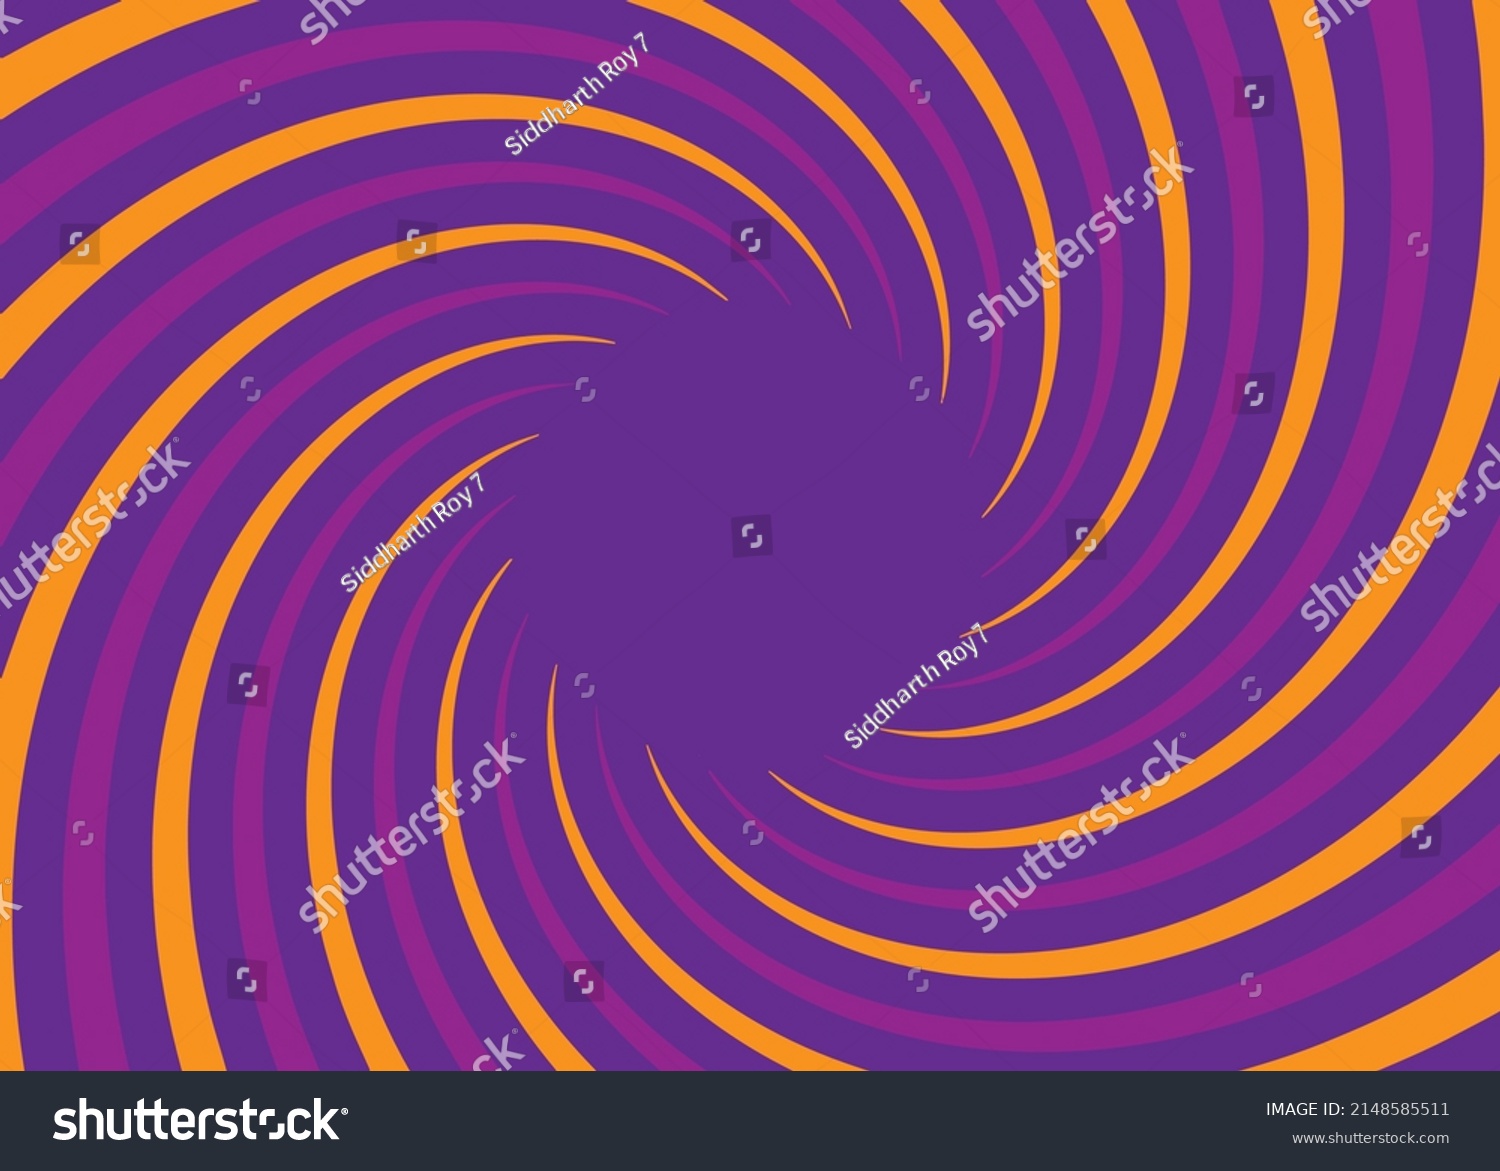 Colorful Swirly Sunburst Vector Background Your Stock Vector (Royalty ...